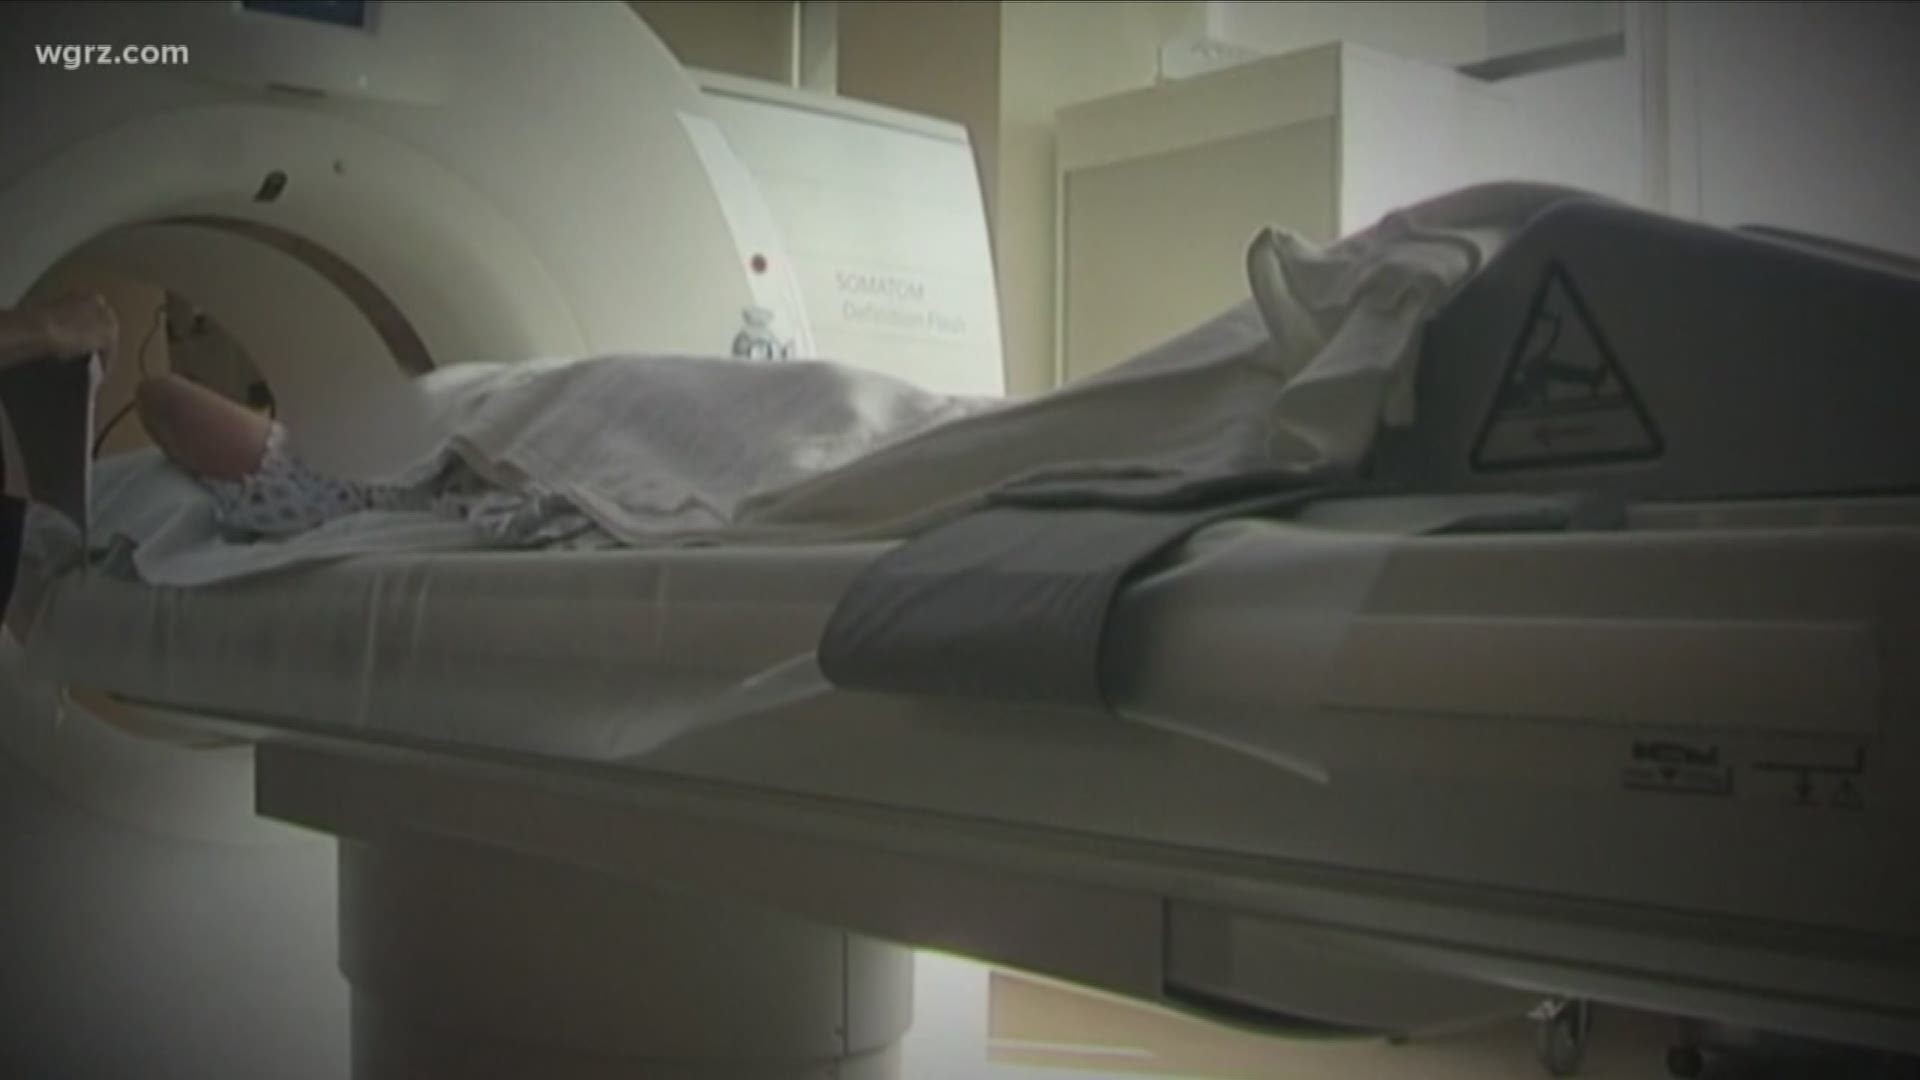 Study shows more cancer cases on east side of Buffalo